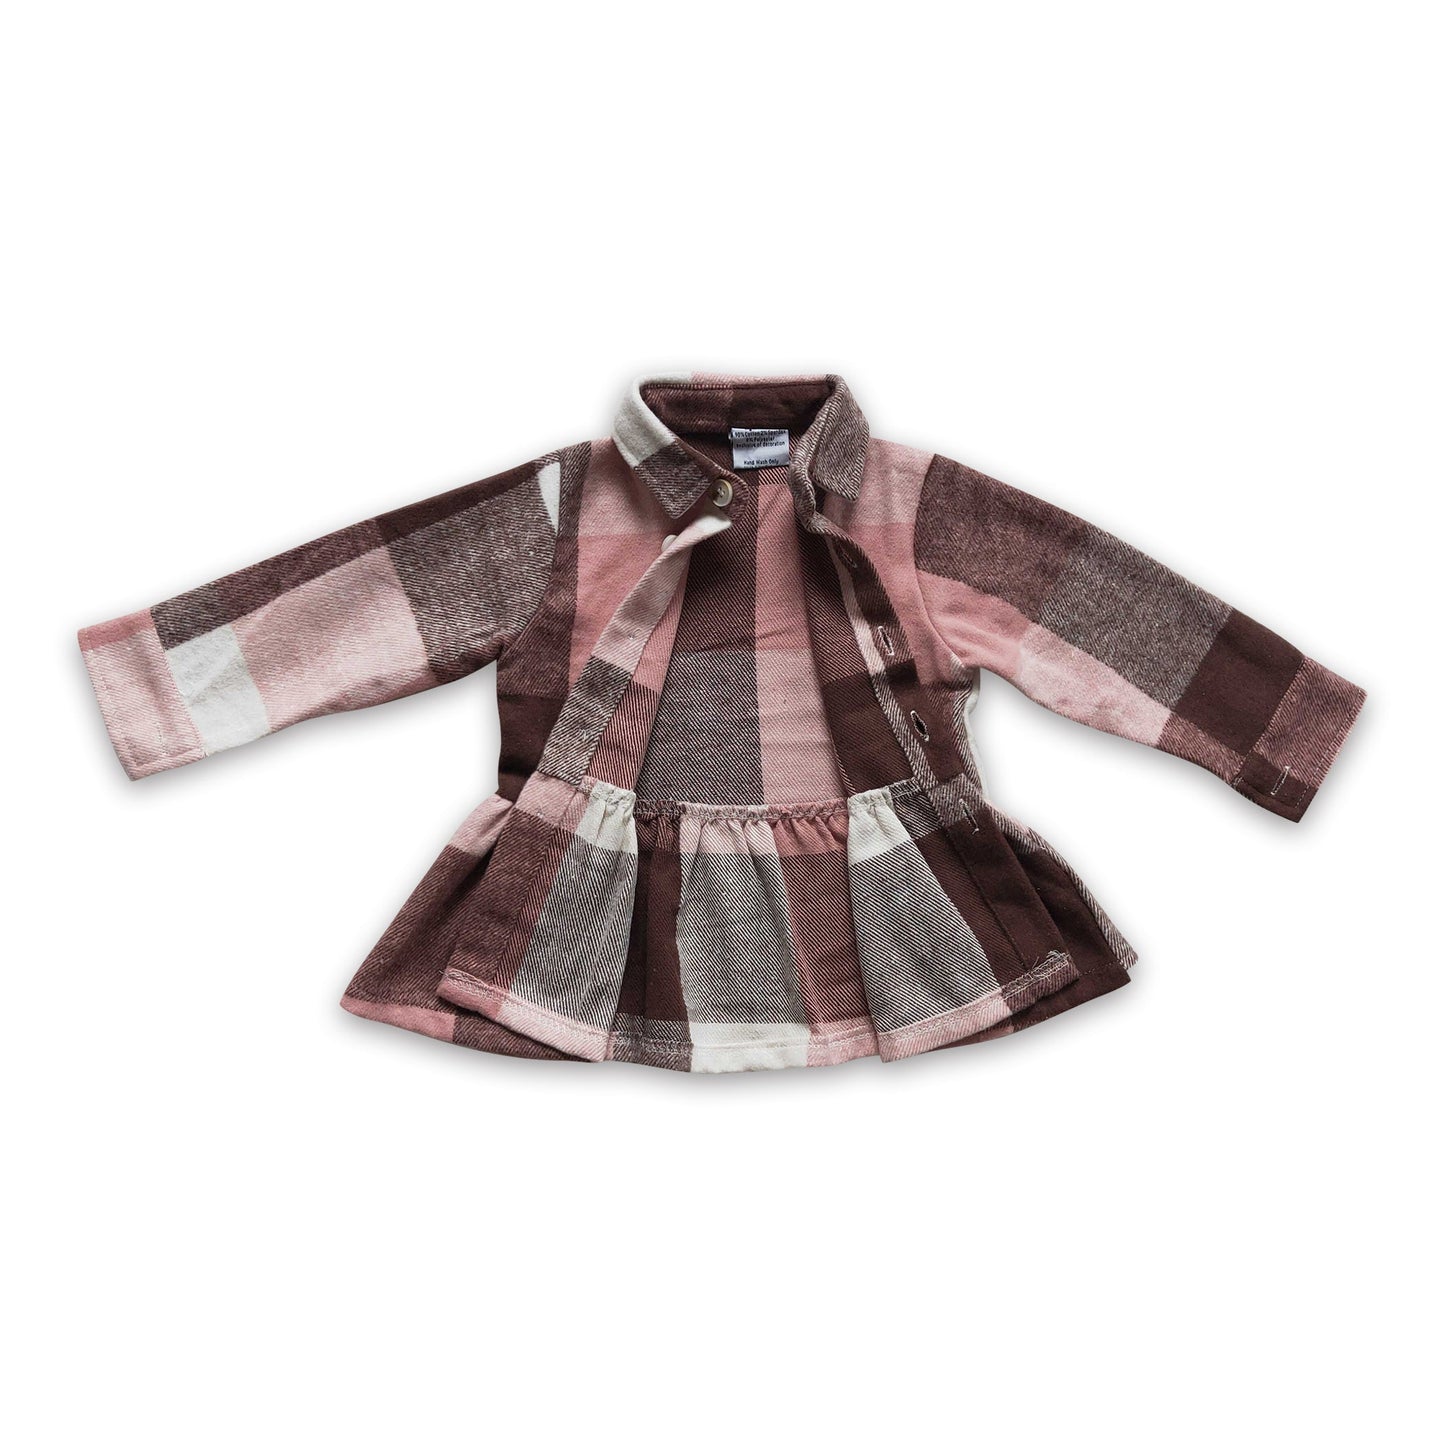 Pink plaid cotton shirt baby girls thick flannel button up ruffle shirt